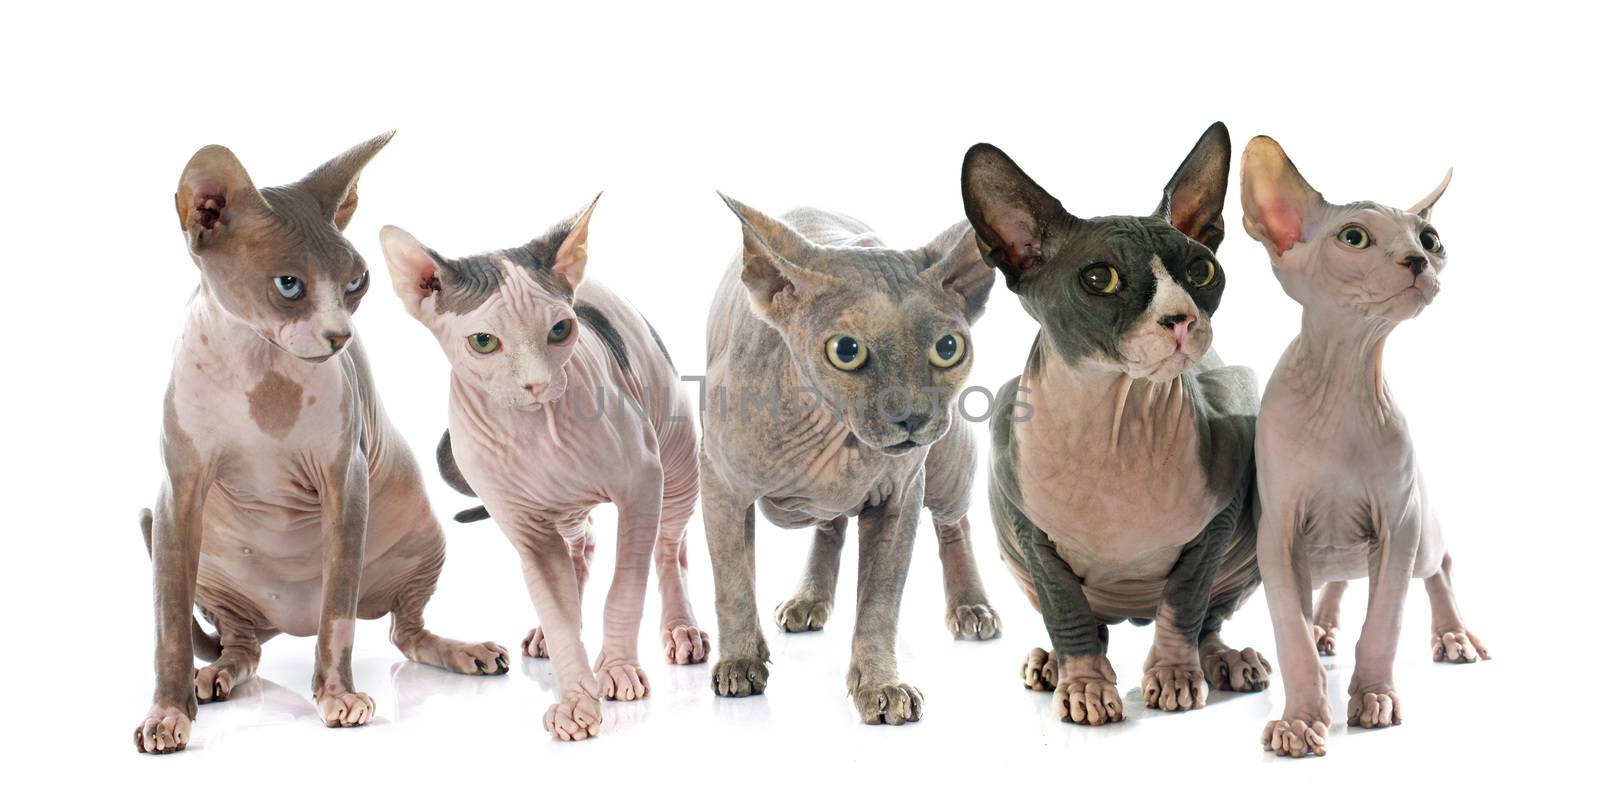 Sphynx Hairless Cats by cynoclub